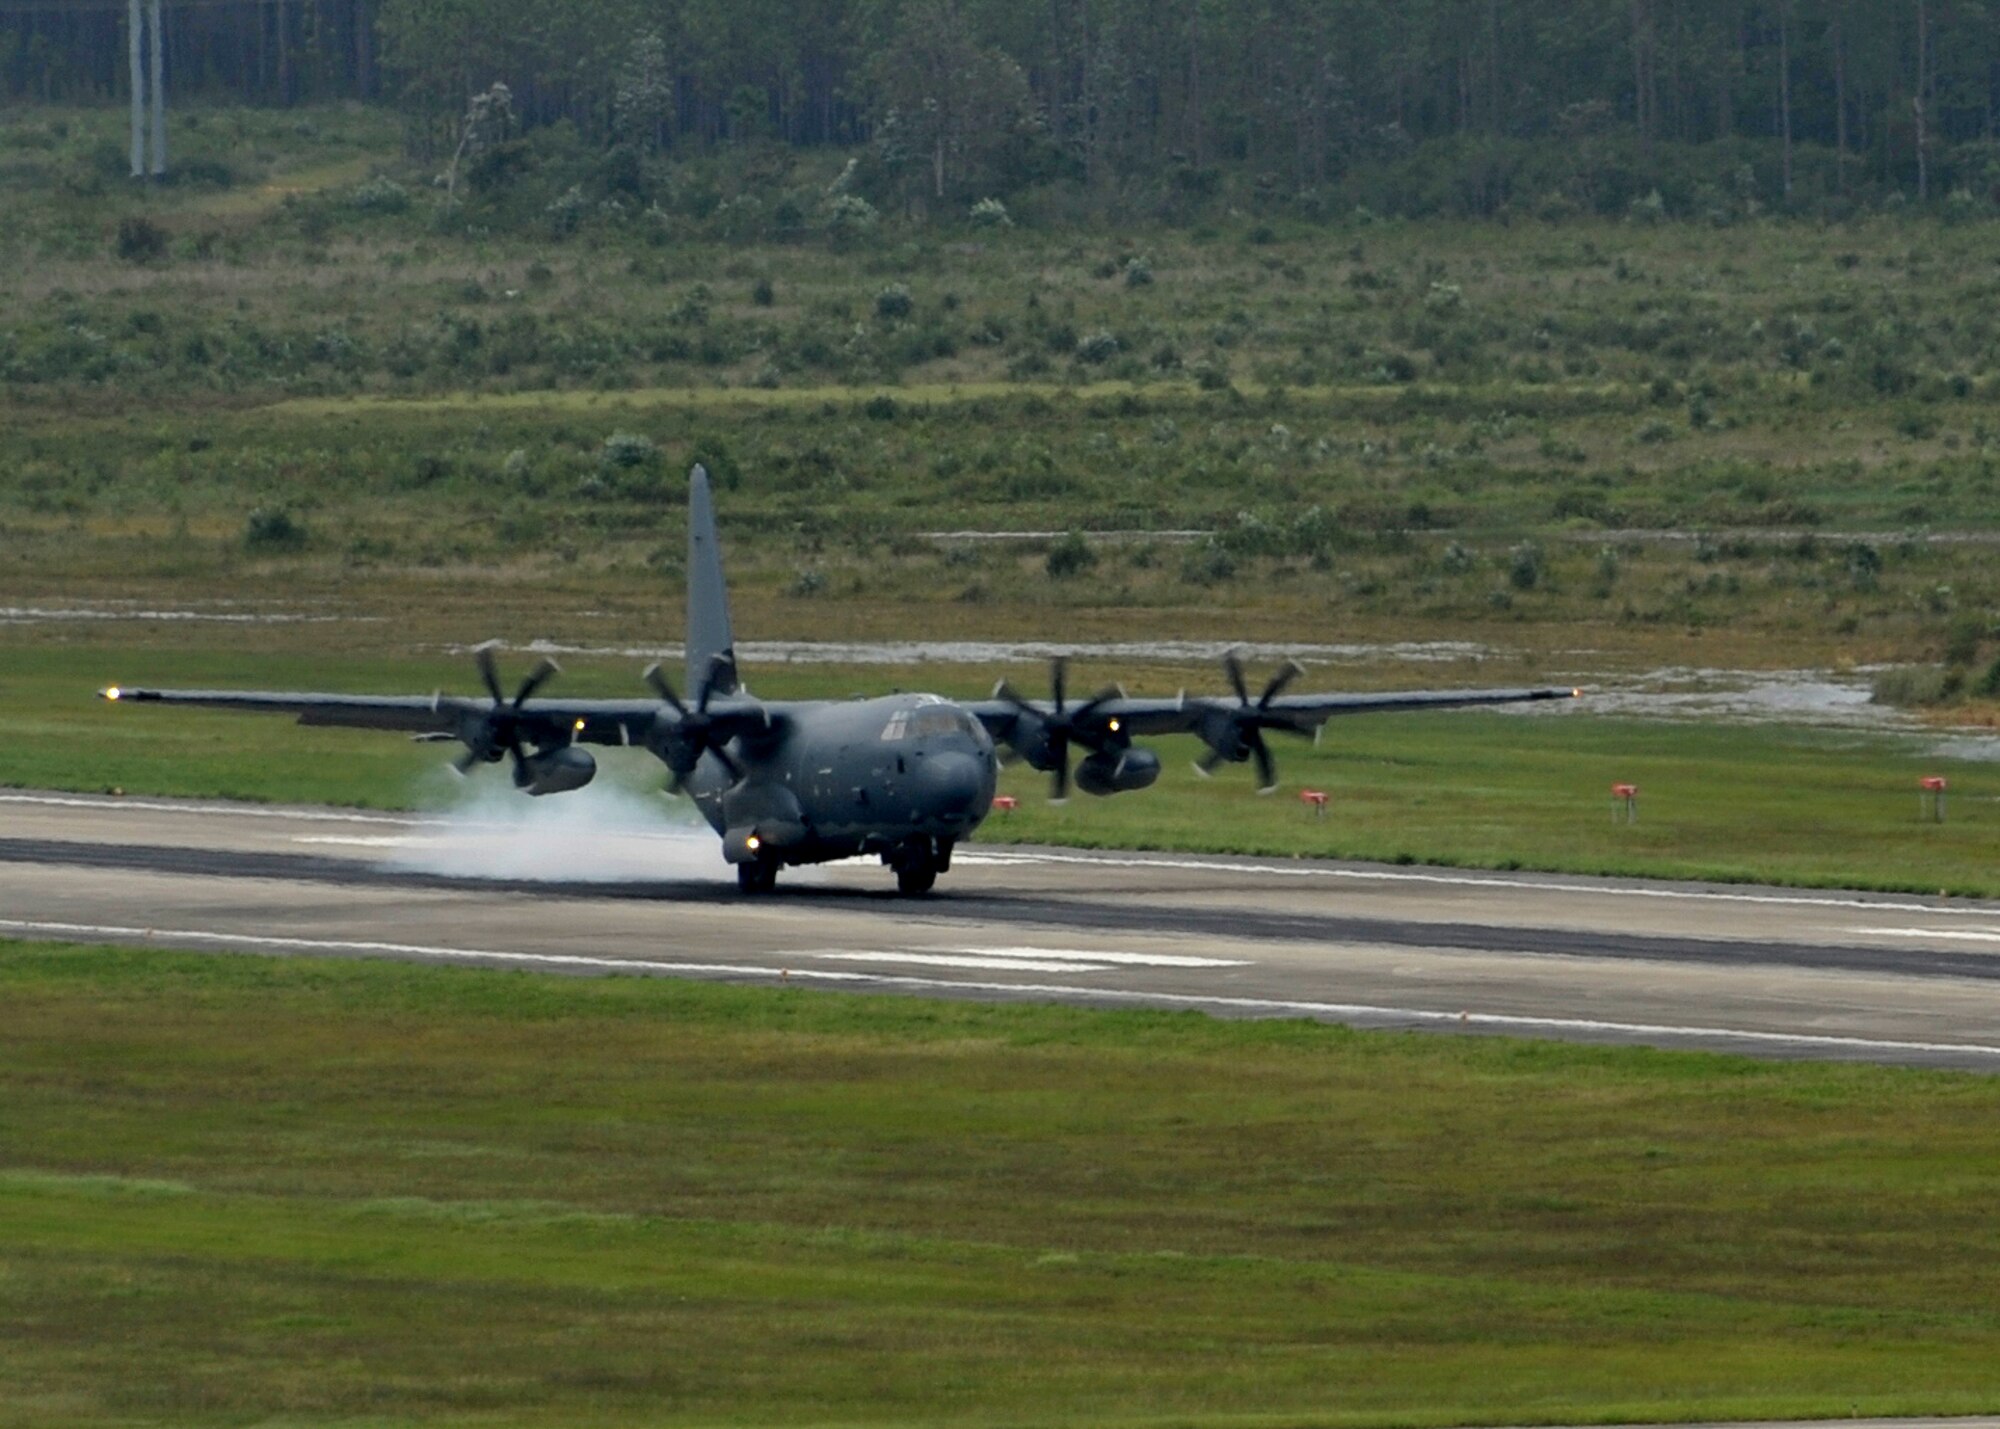 An MC-130J Commando II lands on the flightline at Hurlburt Field, Fla., Aug. 11, 2016. This aircraft is scheduled to be modified into an AC-130J Ghostrider gunshipin the coming months. The Ghostrider’s primary missions are close air support, air interdiction and armed reconnaissance. (U.S. Air Force photo by Staff Sgt. Kentavist Brackin)